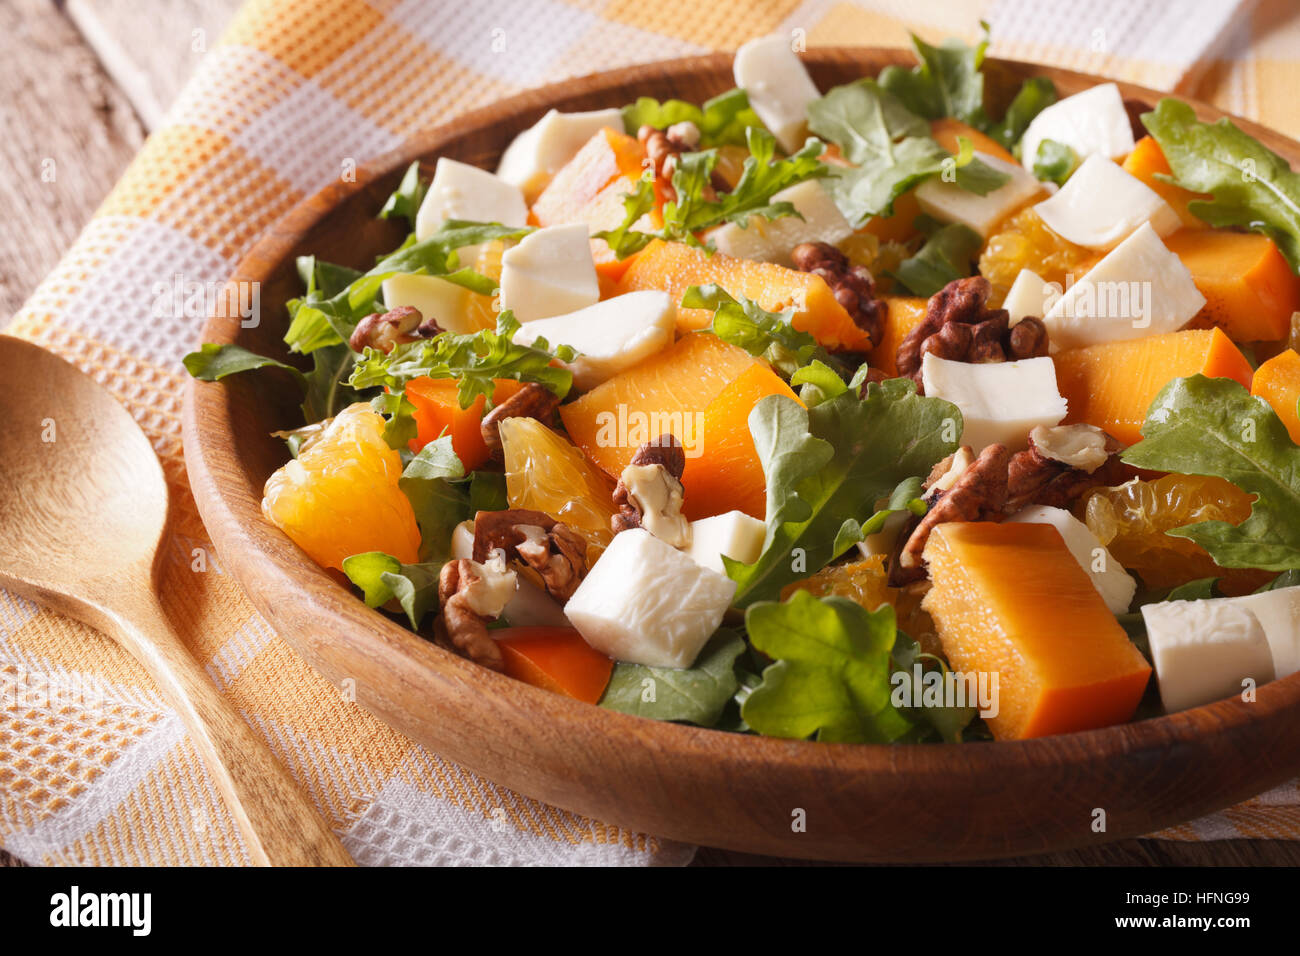 Healthy salad with persimmon, arugula and cheese close-up on a plate. horizontal Stock Photo